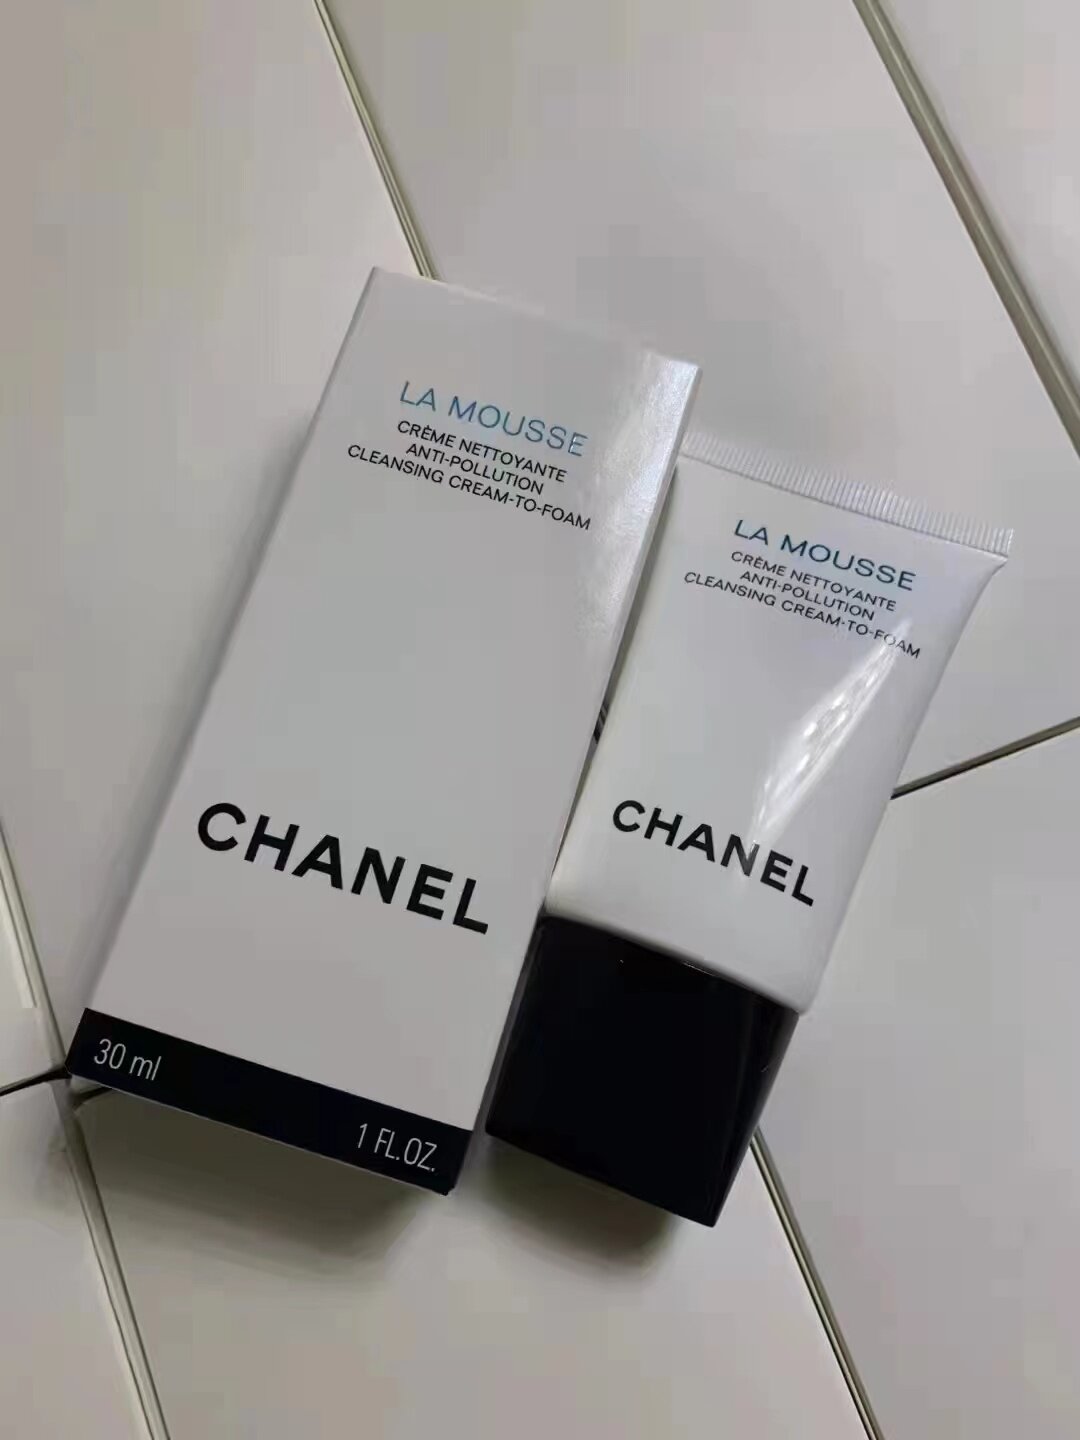 Chanel La Mousse Anti-Pollution Cleansing Cream-To-Foam :- 30 ml